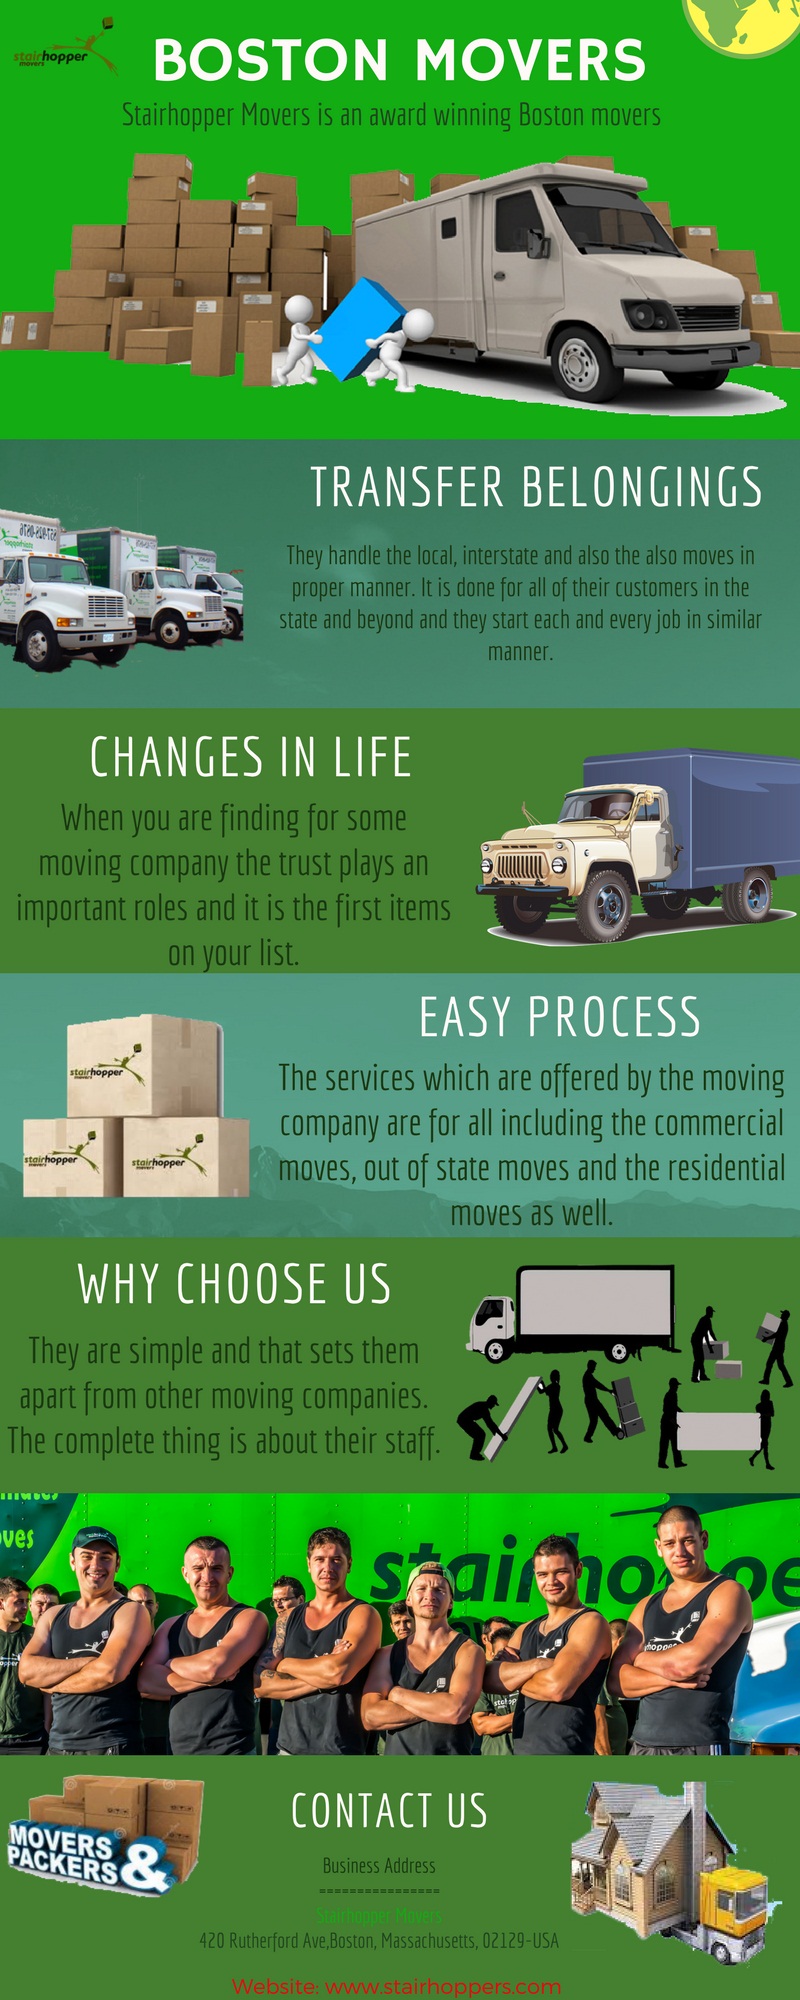 Boston Moving Companies At Boston Moving Company, our professional teams of movers provide best local, interstate and long distance moving services in Boston.
https://stairhoppers.com/
 by Stairhoppermovers